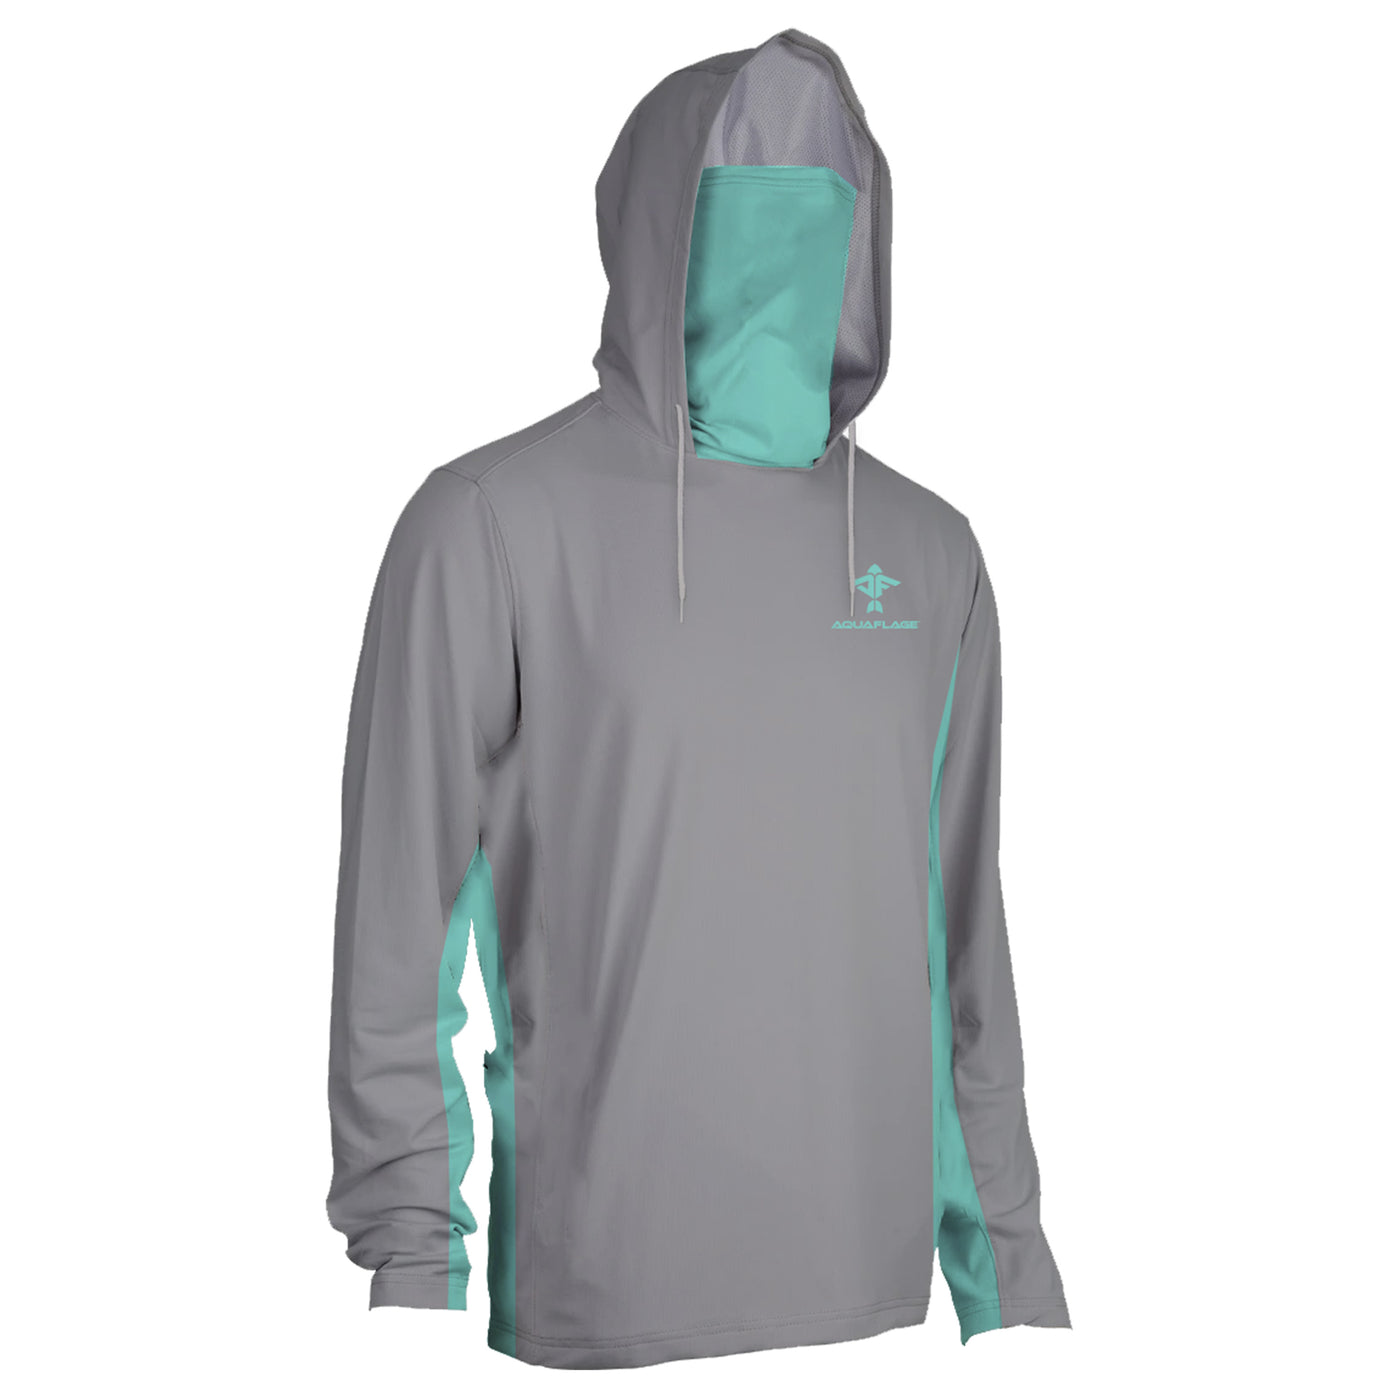 Rubicon Shield Seagrass/Grey Performance Hoodie With Mask - Men's